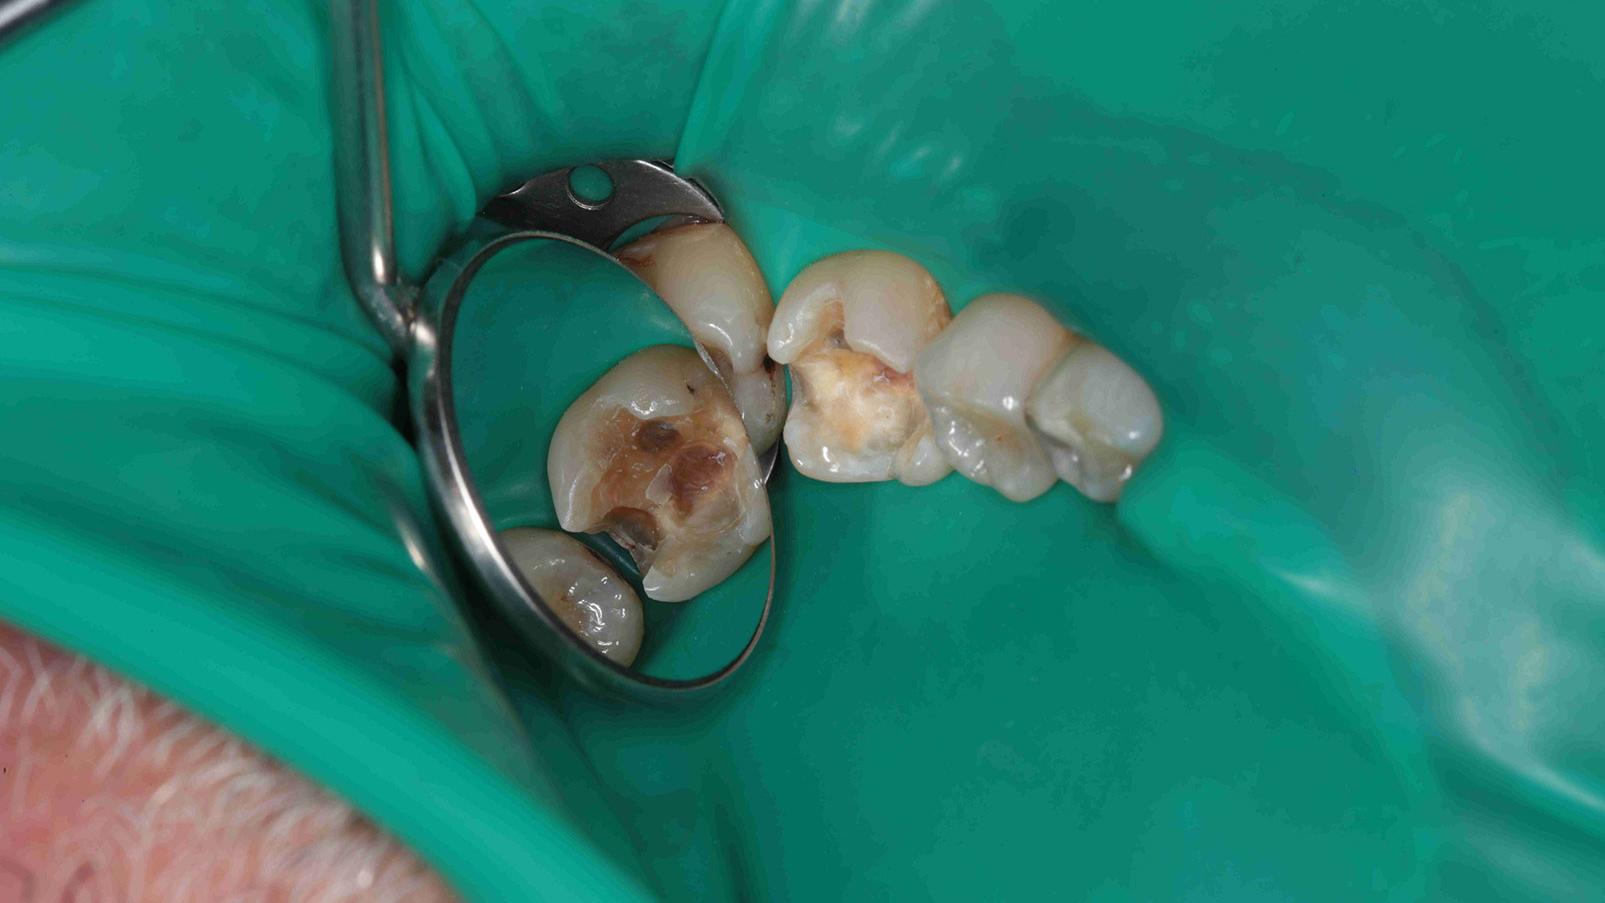 mage of the cavity after first attempt of removing old restoration and caries with the naked eye